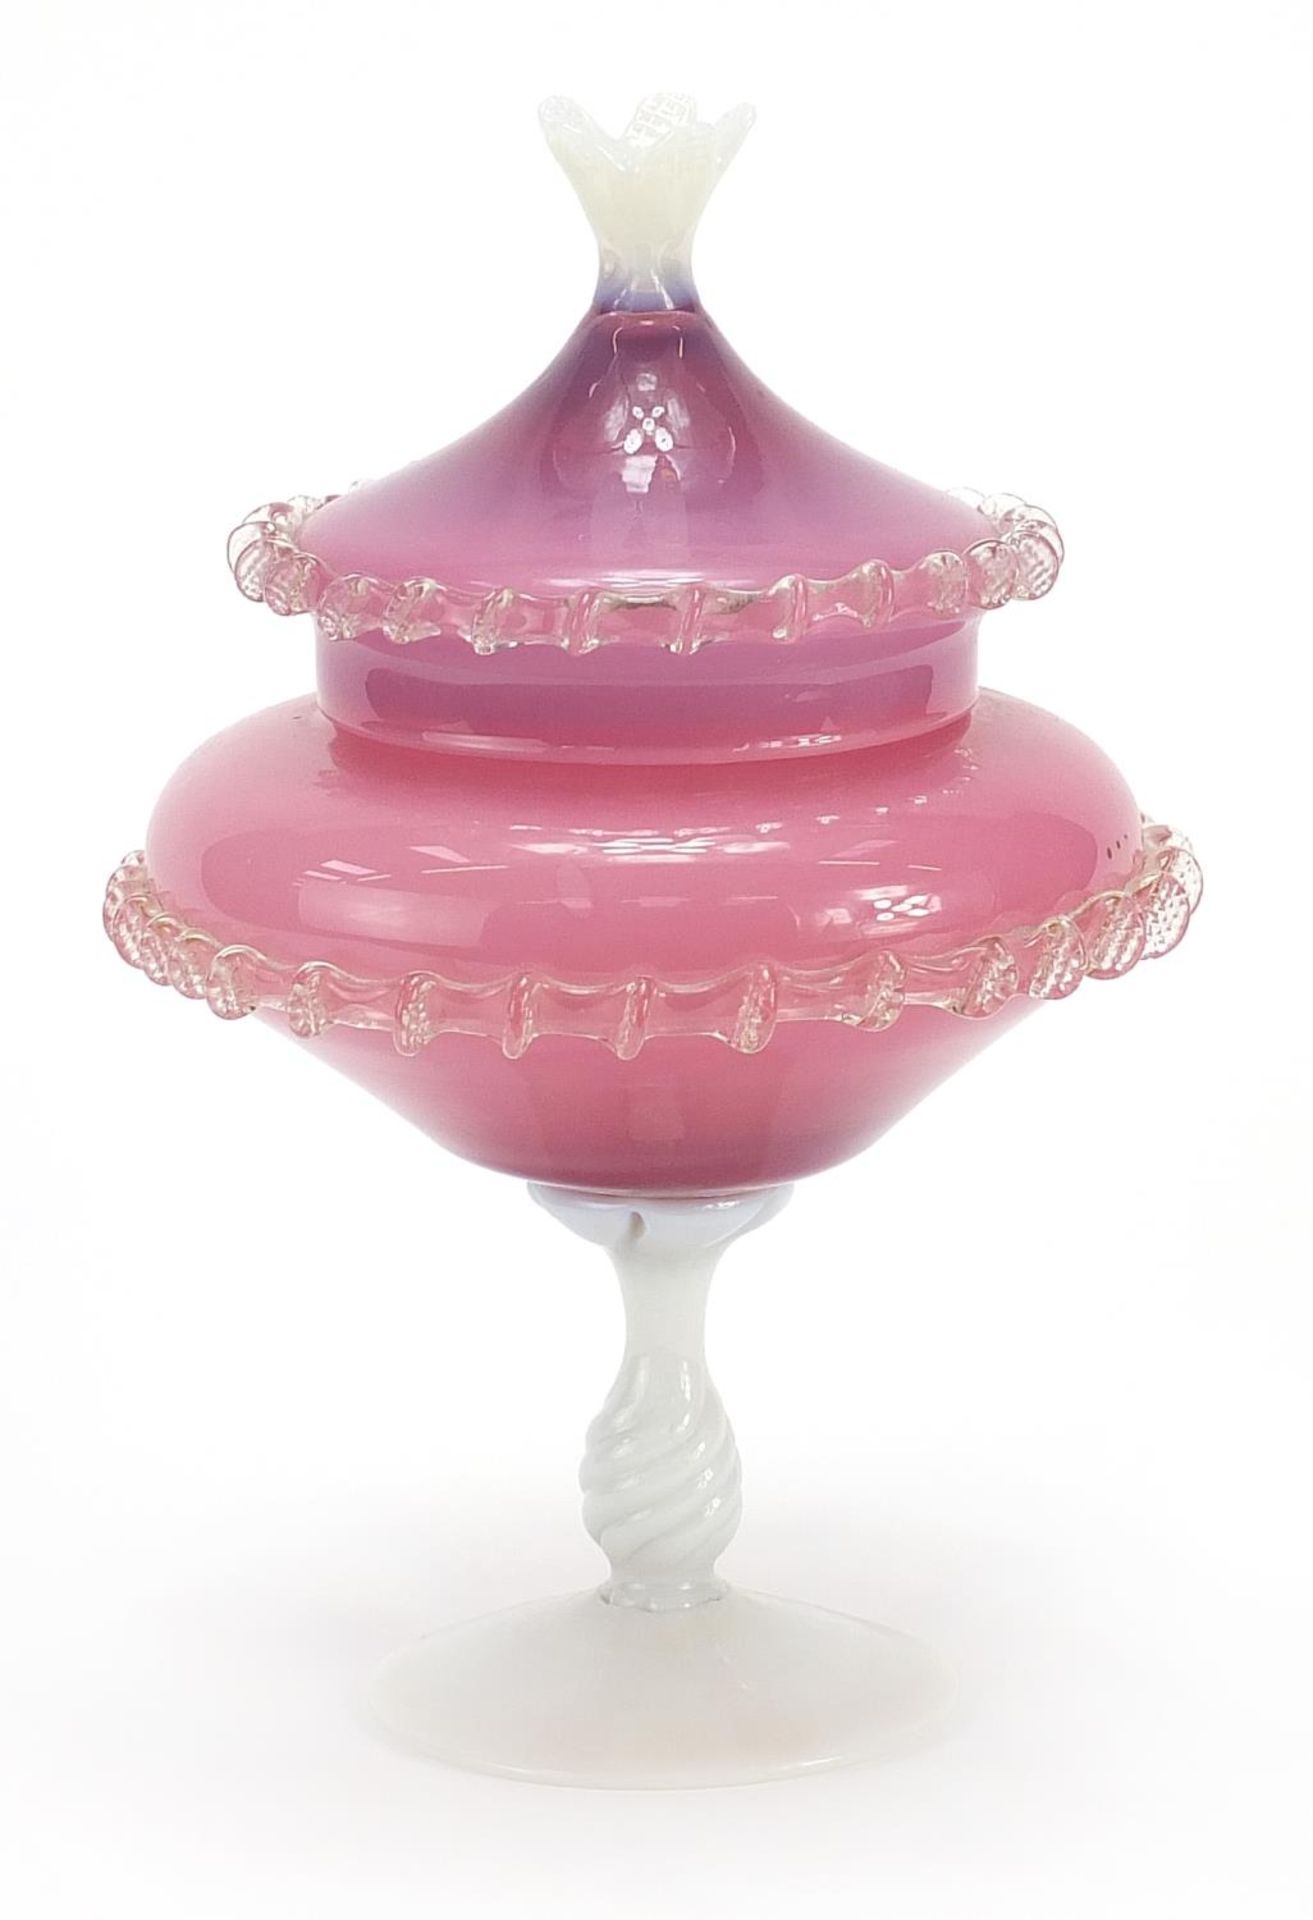 Vaseline and pink glass centerpiece and cover with frilled decoration, 30cm high